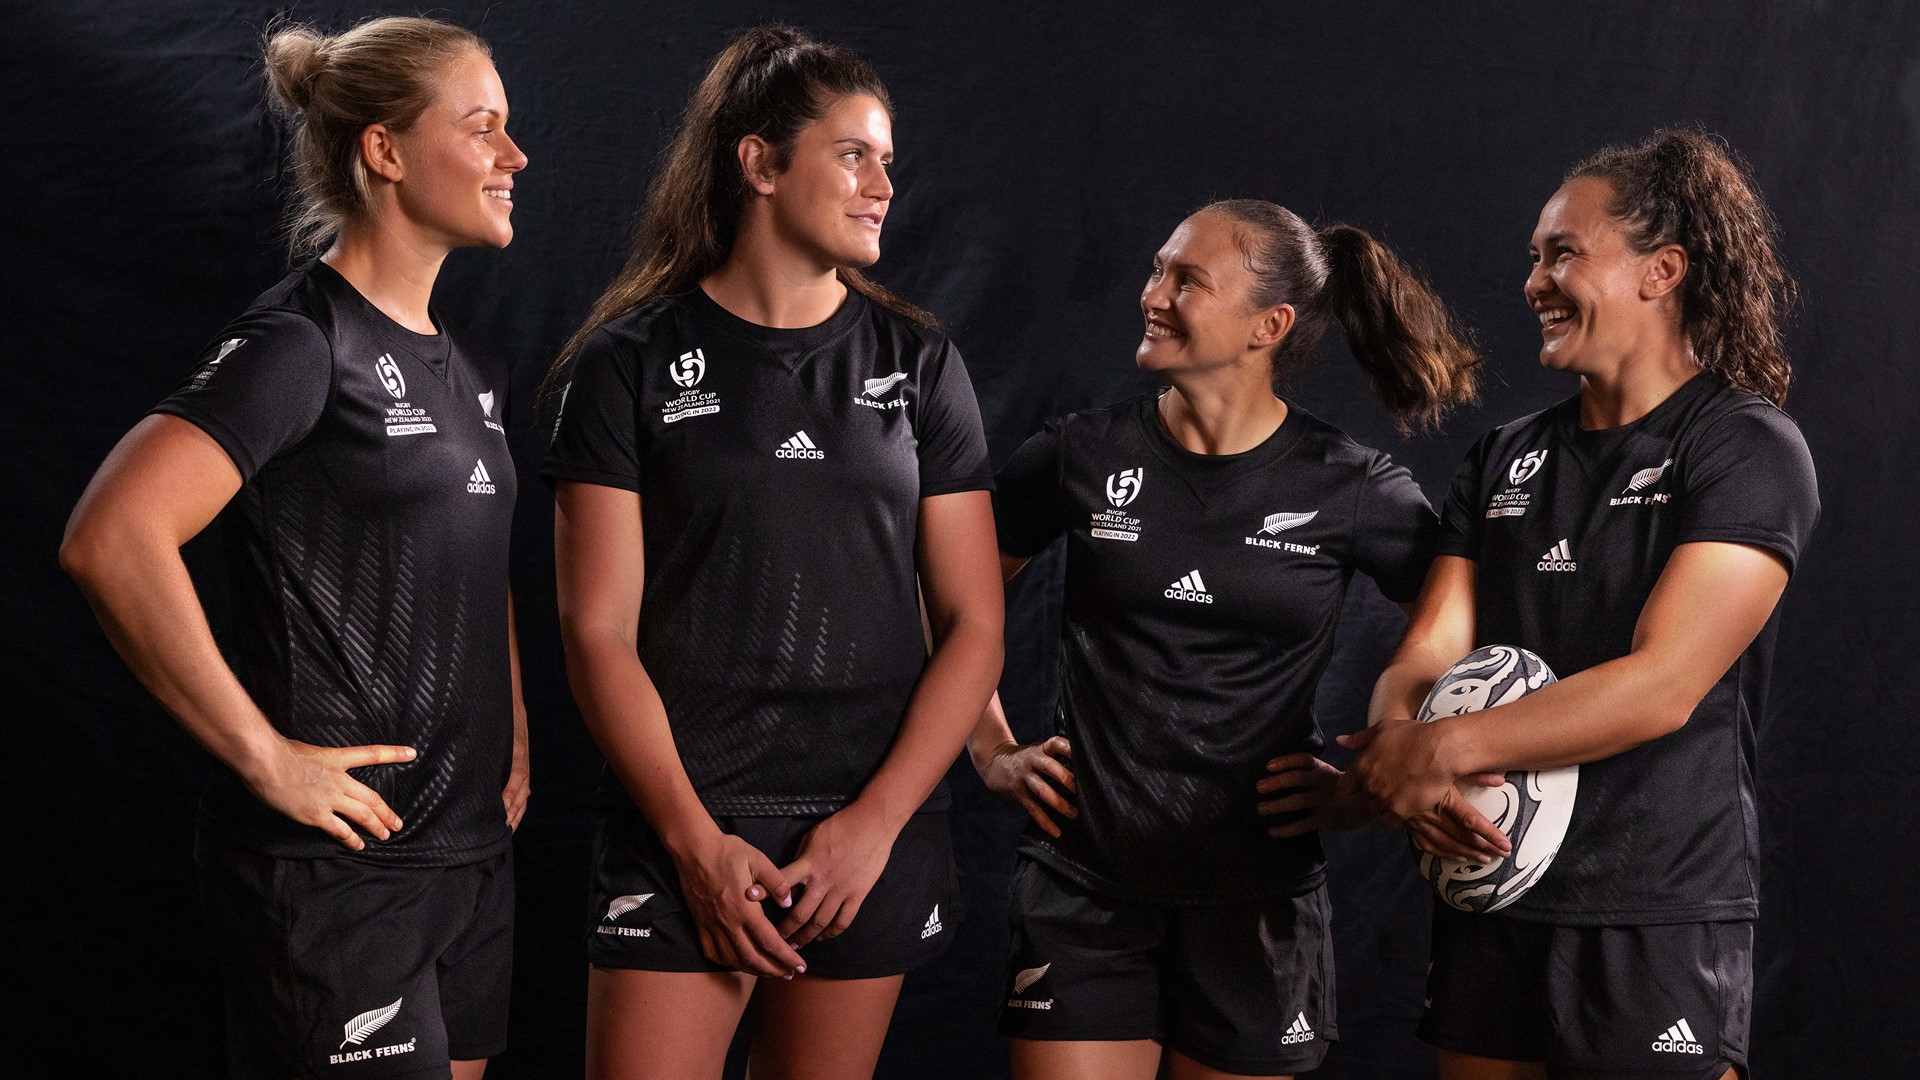 Adidas launches Black Ferns' Rugby World Cup jersey » allblacks.com